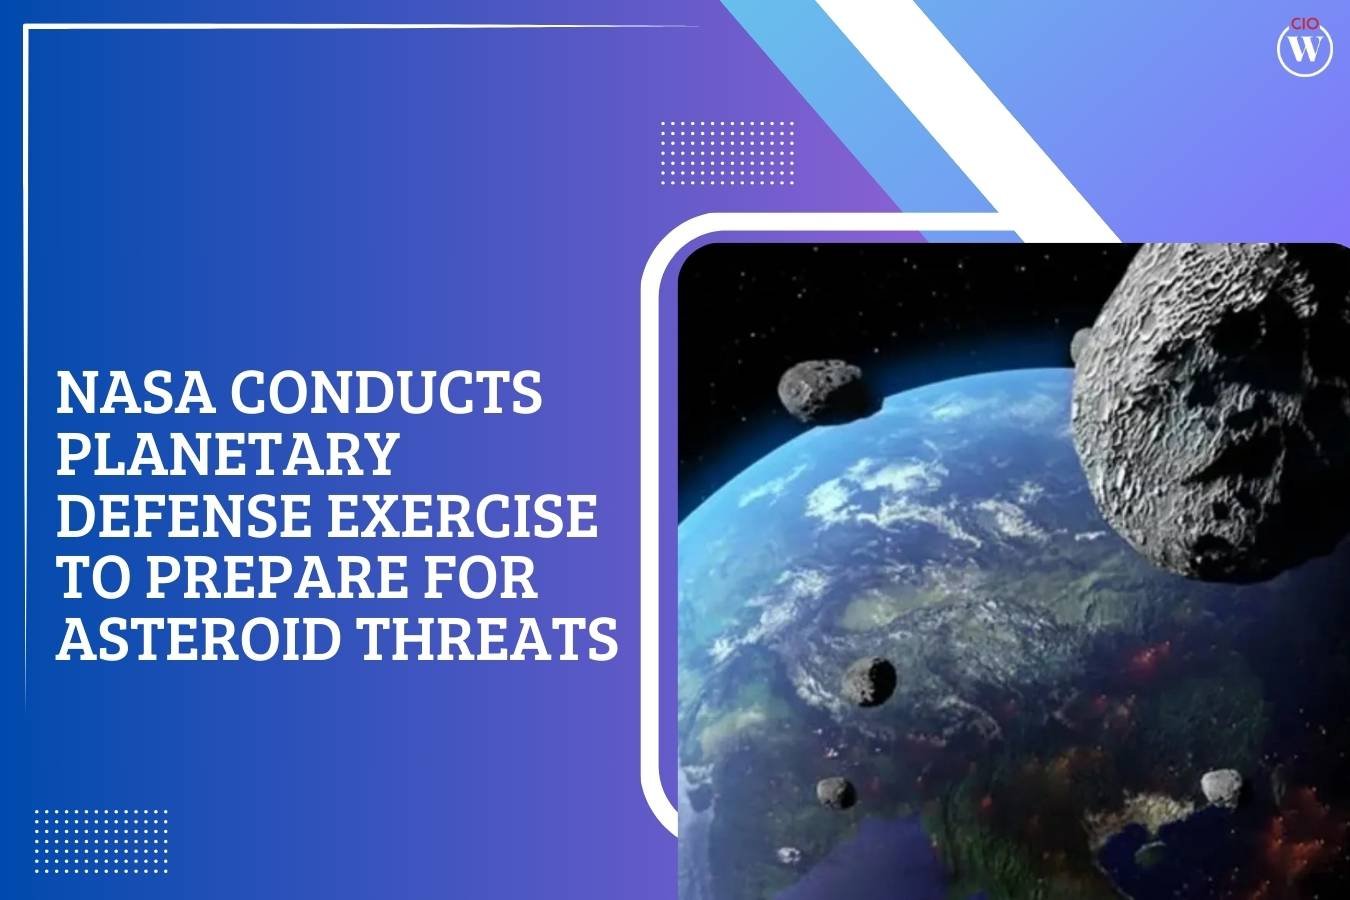 NASA Conducts Planetary Defense Exercise to Prepare for Asteroid Threats